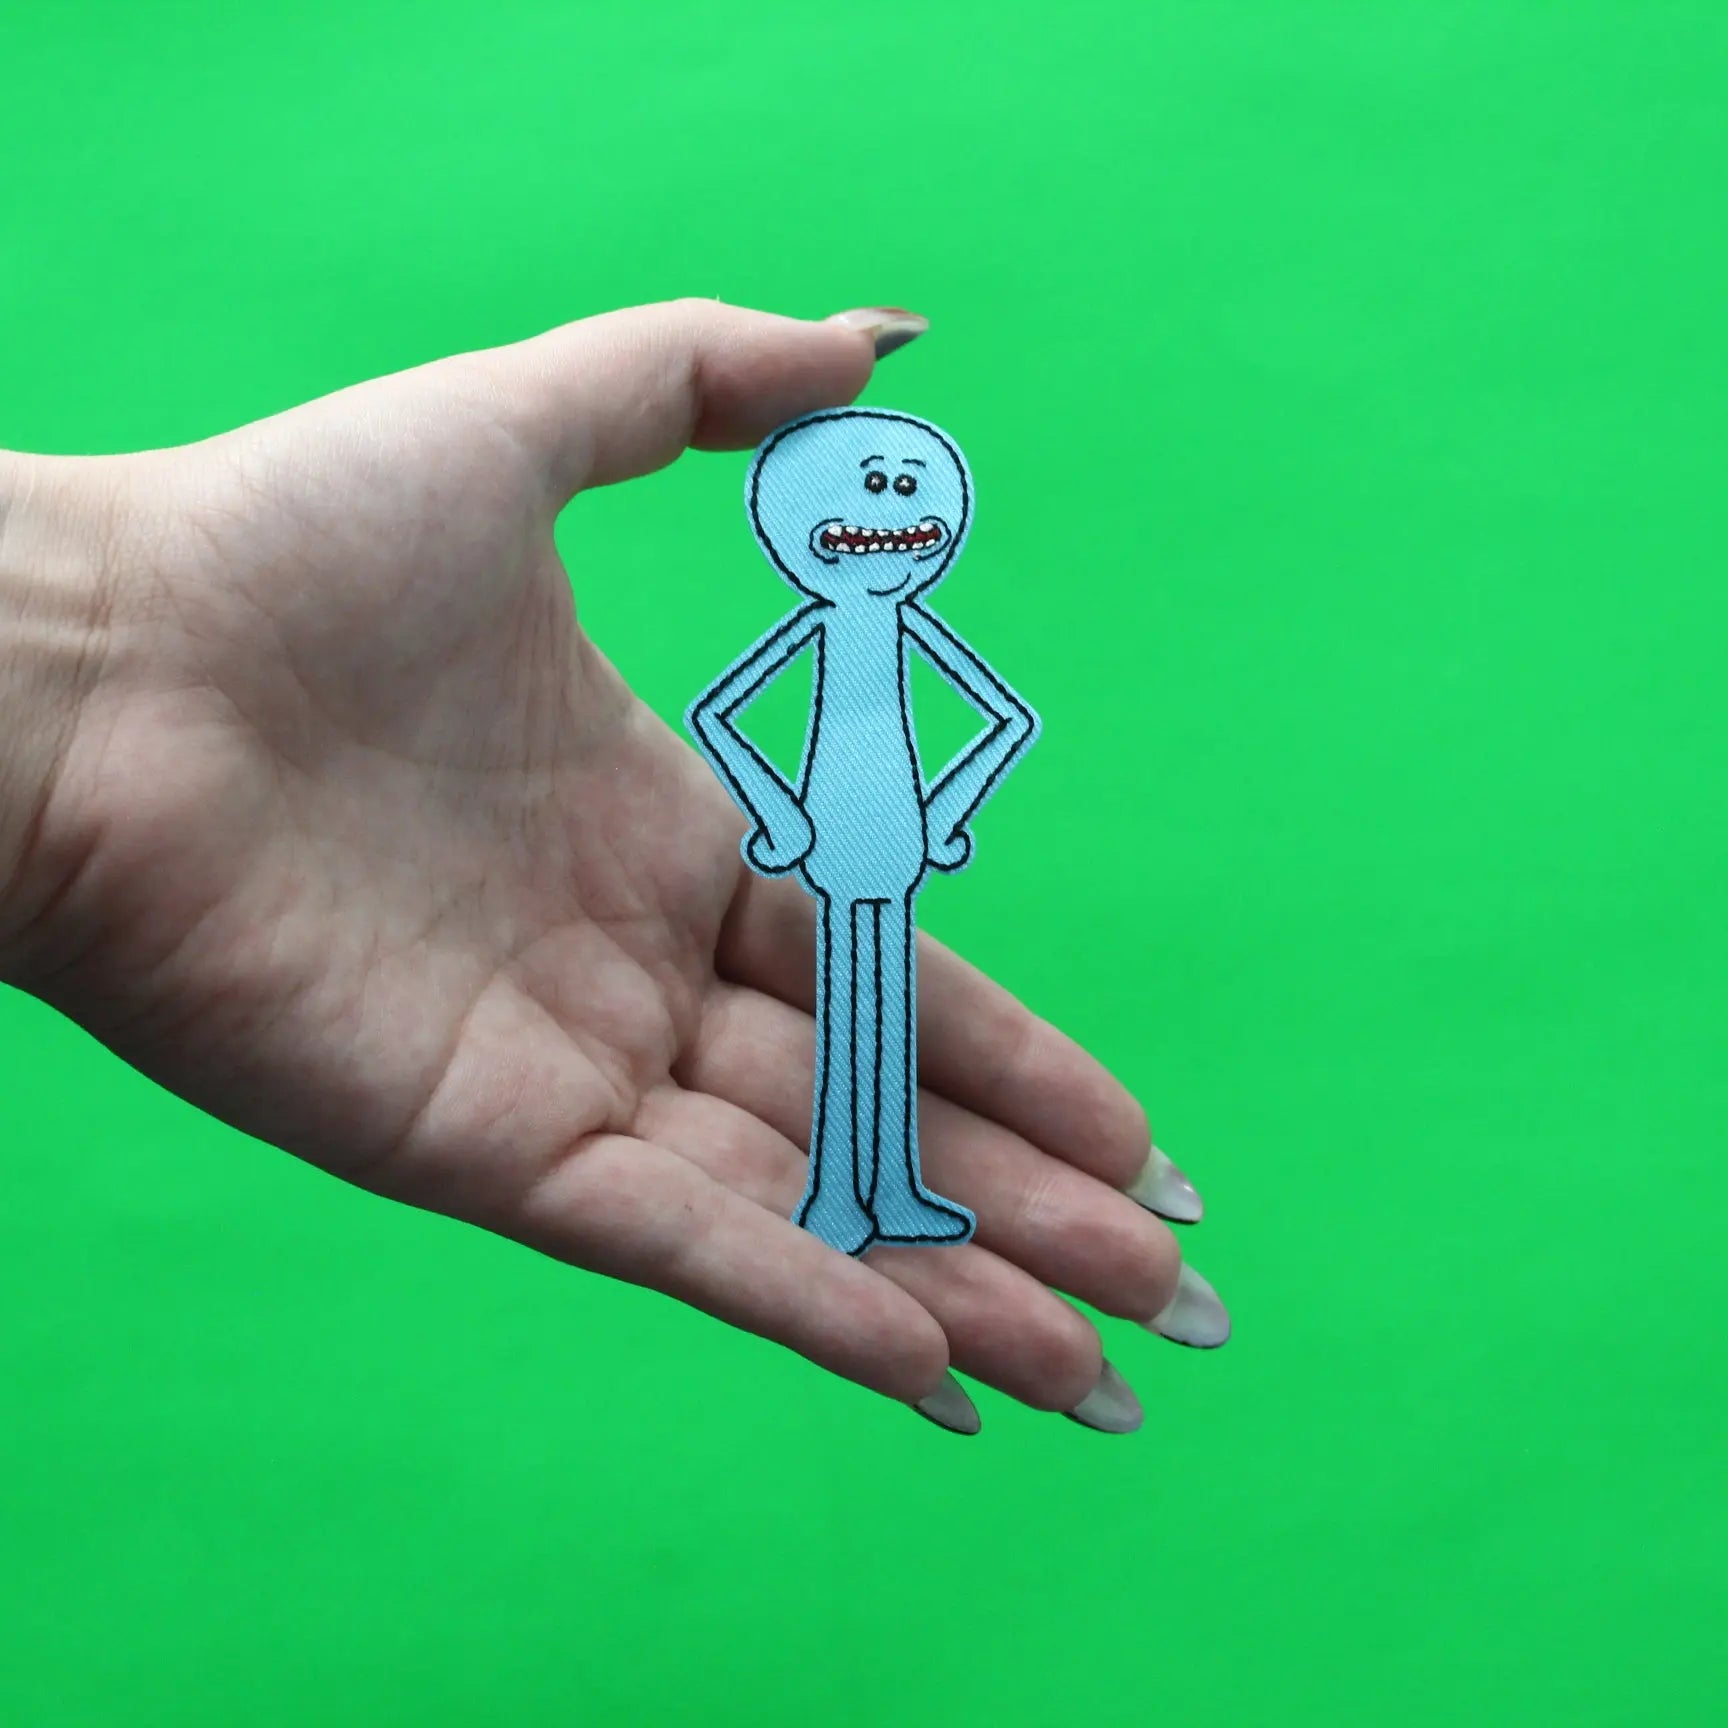 Rick And Morty Mr. Meeseeks Patch Cartoon Network Animation Embroidered Iron On